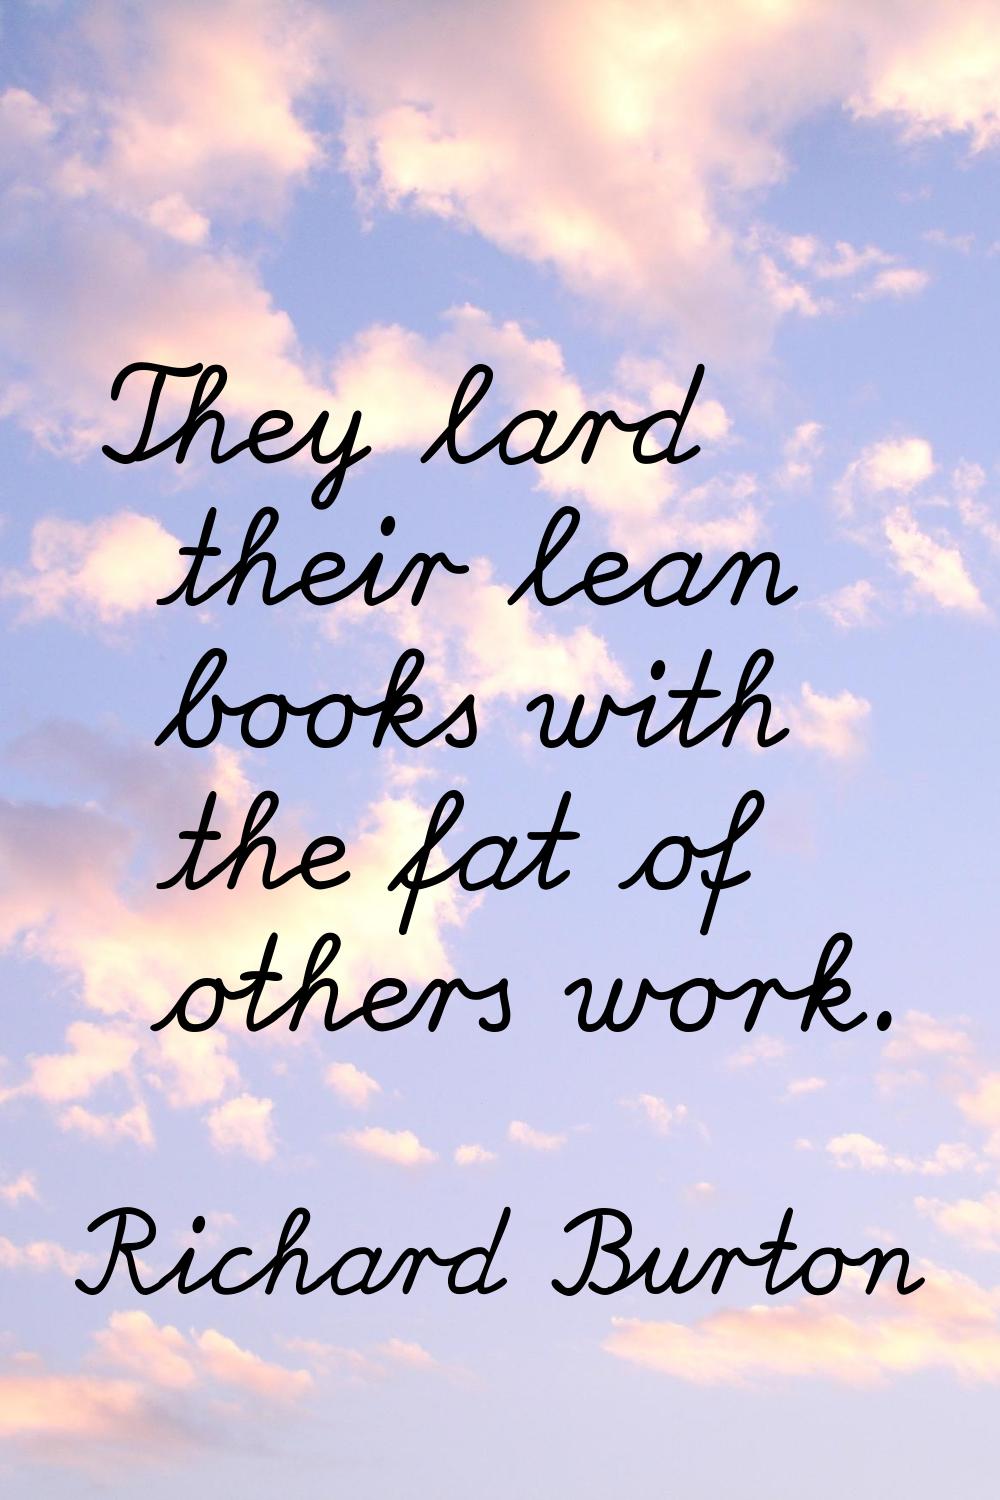 They lard their lean books with the fat of others work.